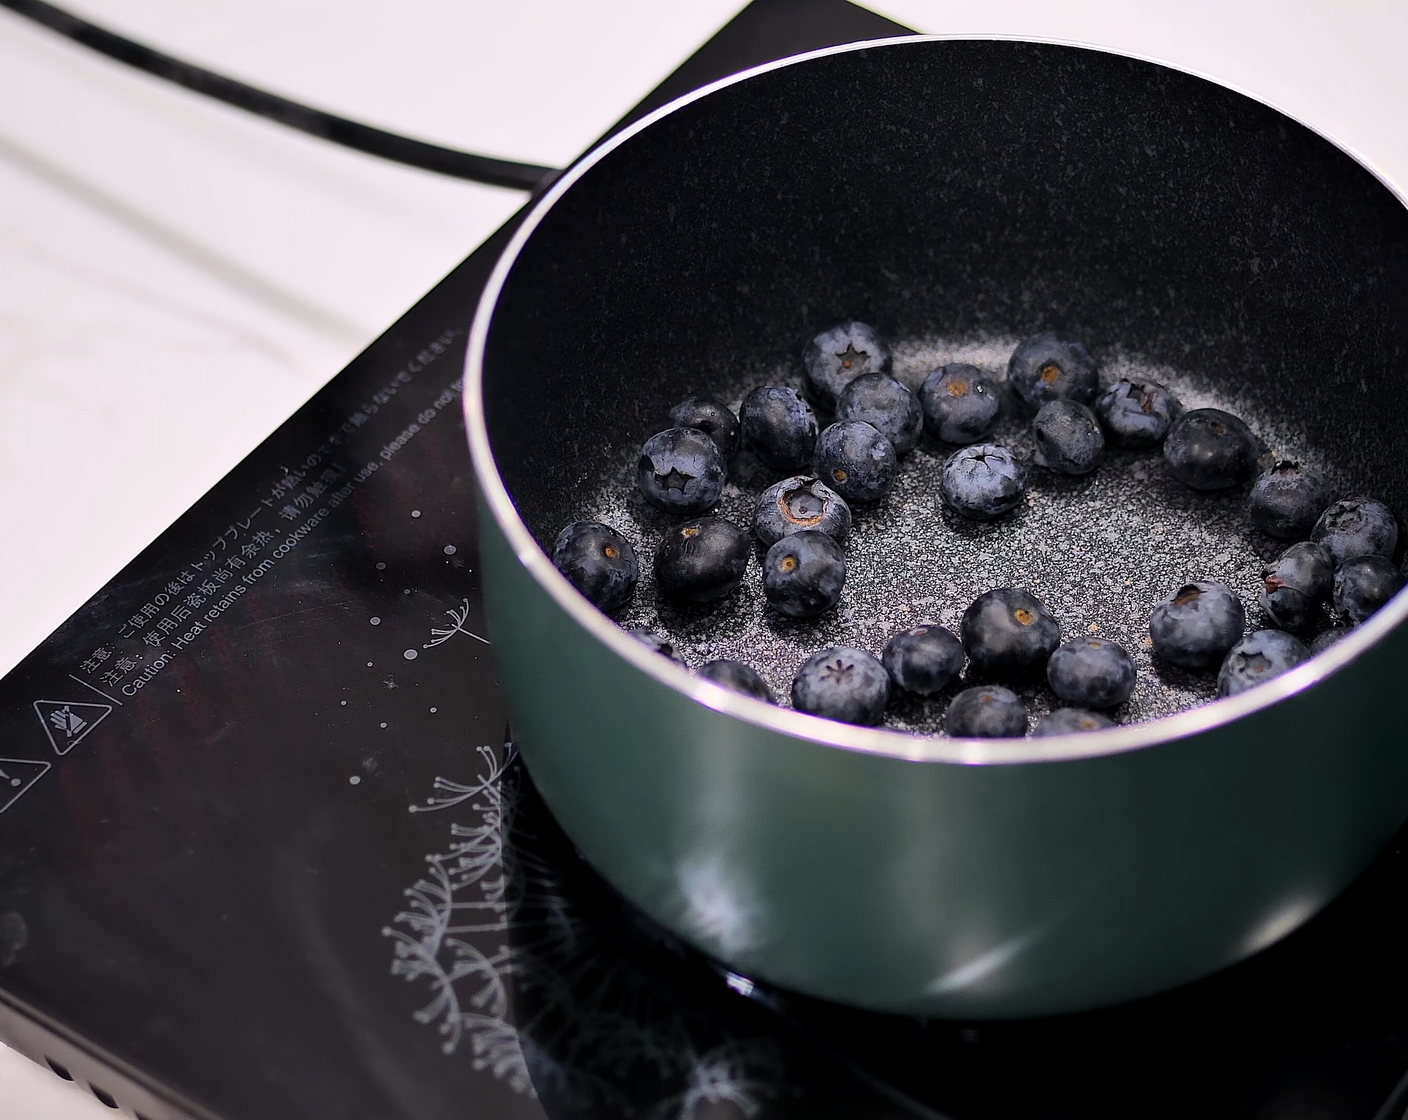 step 16 To make the Blueberry Jelly Layer, in a saucepan, add Fresh Blueberry (1/2 cup), Water (2 Tbsp), and Granulated Sugar (1 Tbsp). Bring it up to a boil and cook the berries for a minute or two until the mixture is thoroughly purple and the berries are soft.